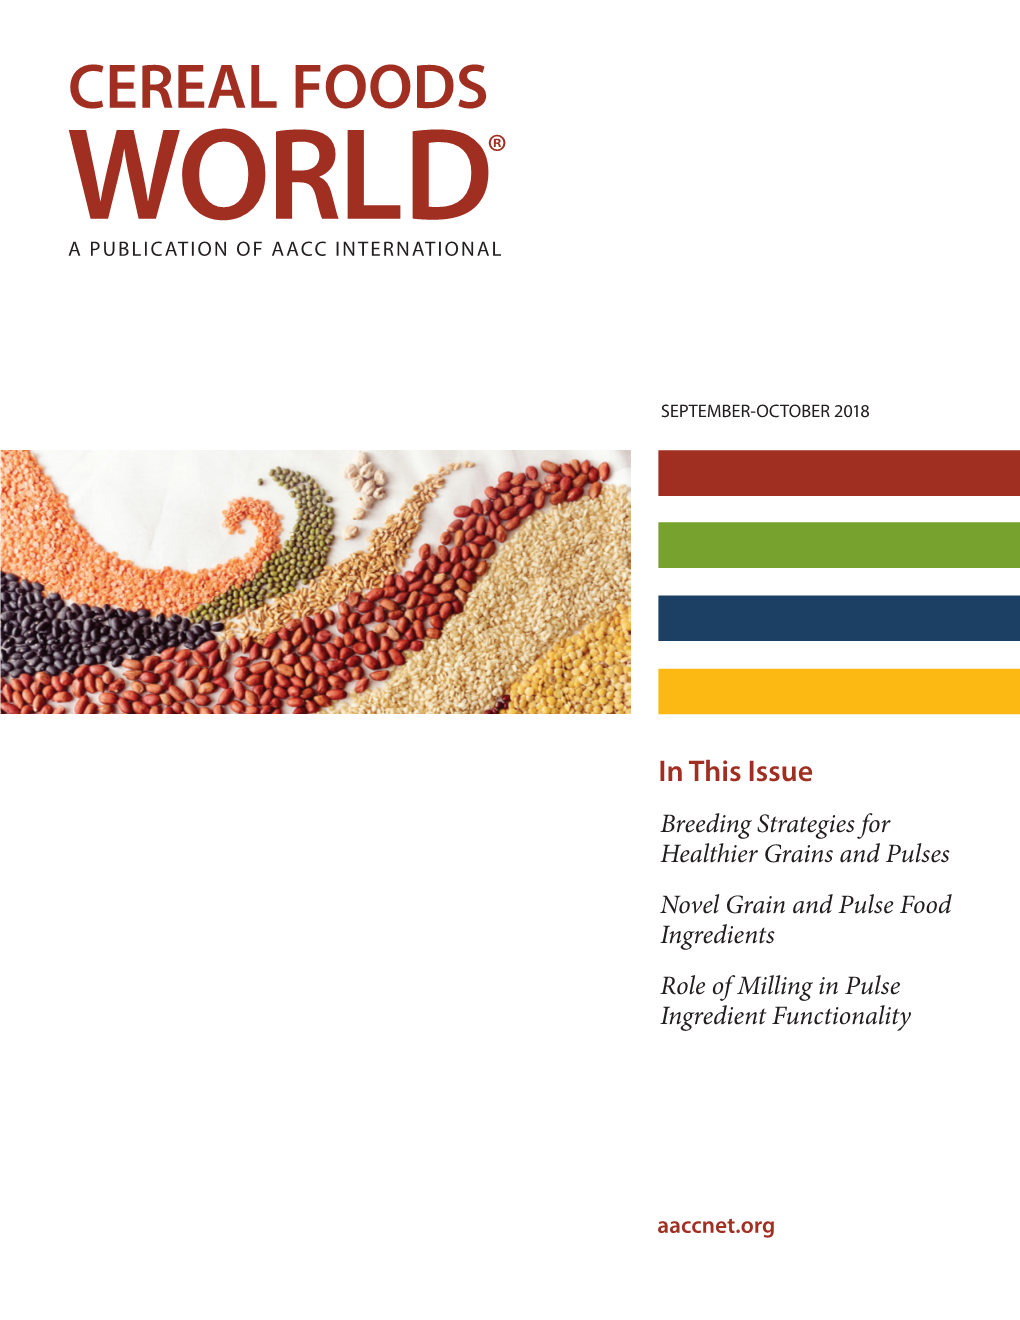 Cereal Foods World® a Publication of Aacc International